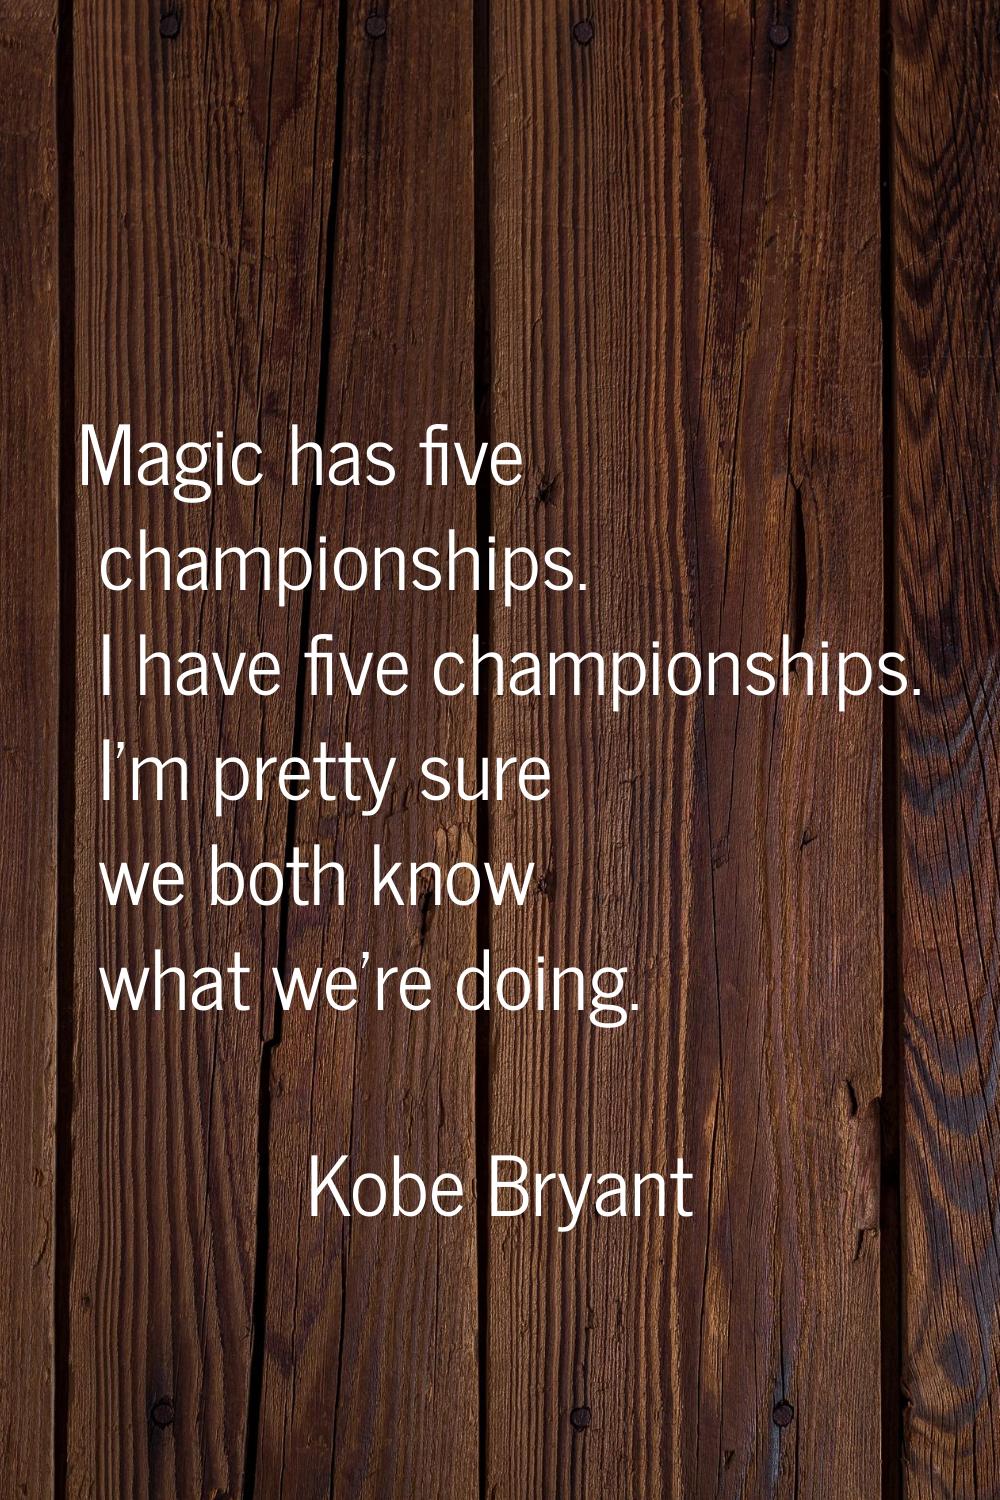 Magic has five championships. I have five championships. I'm pretty sure we both know what we're do